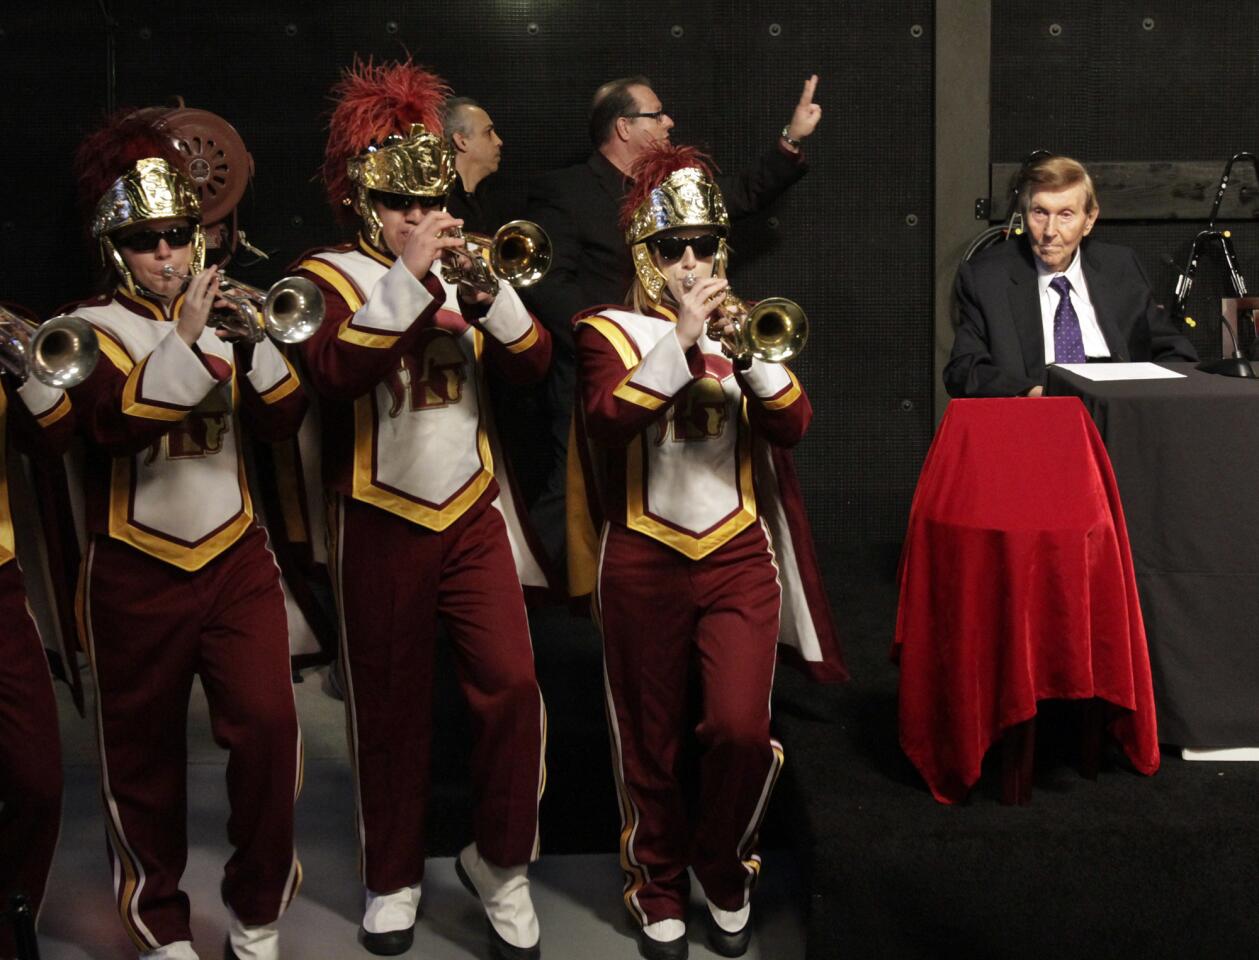 USC marching band members and Sumner Redstone